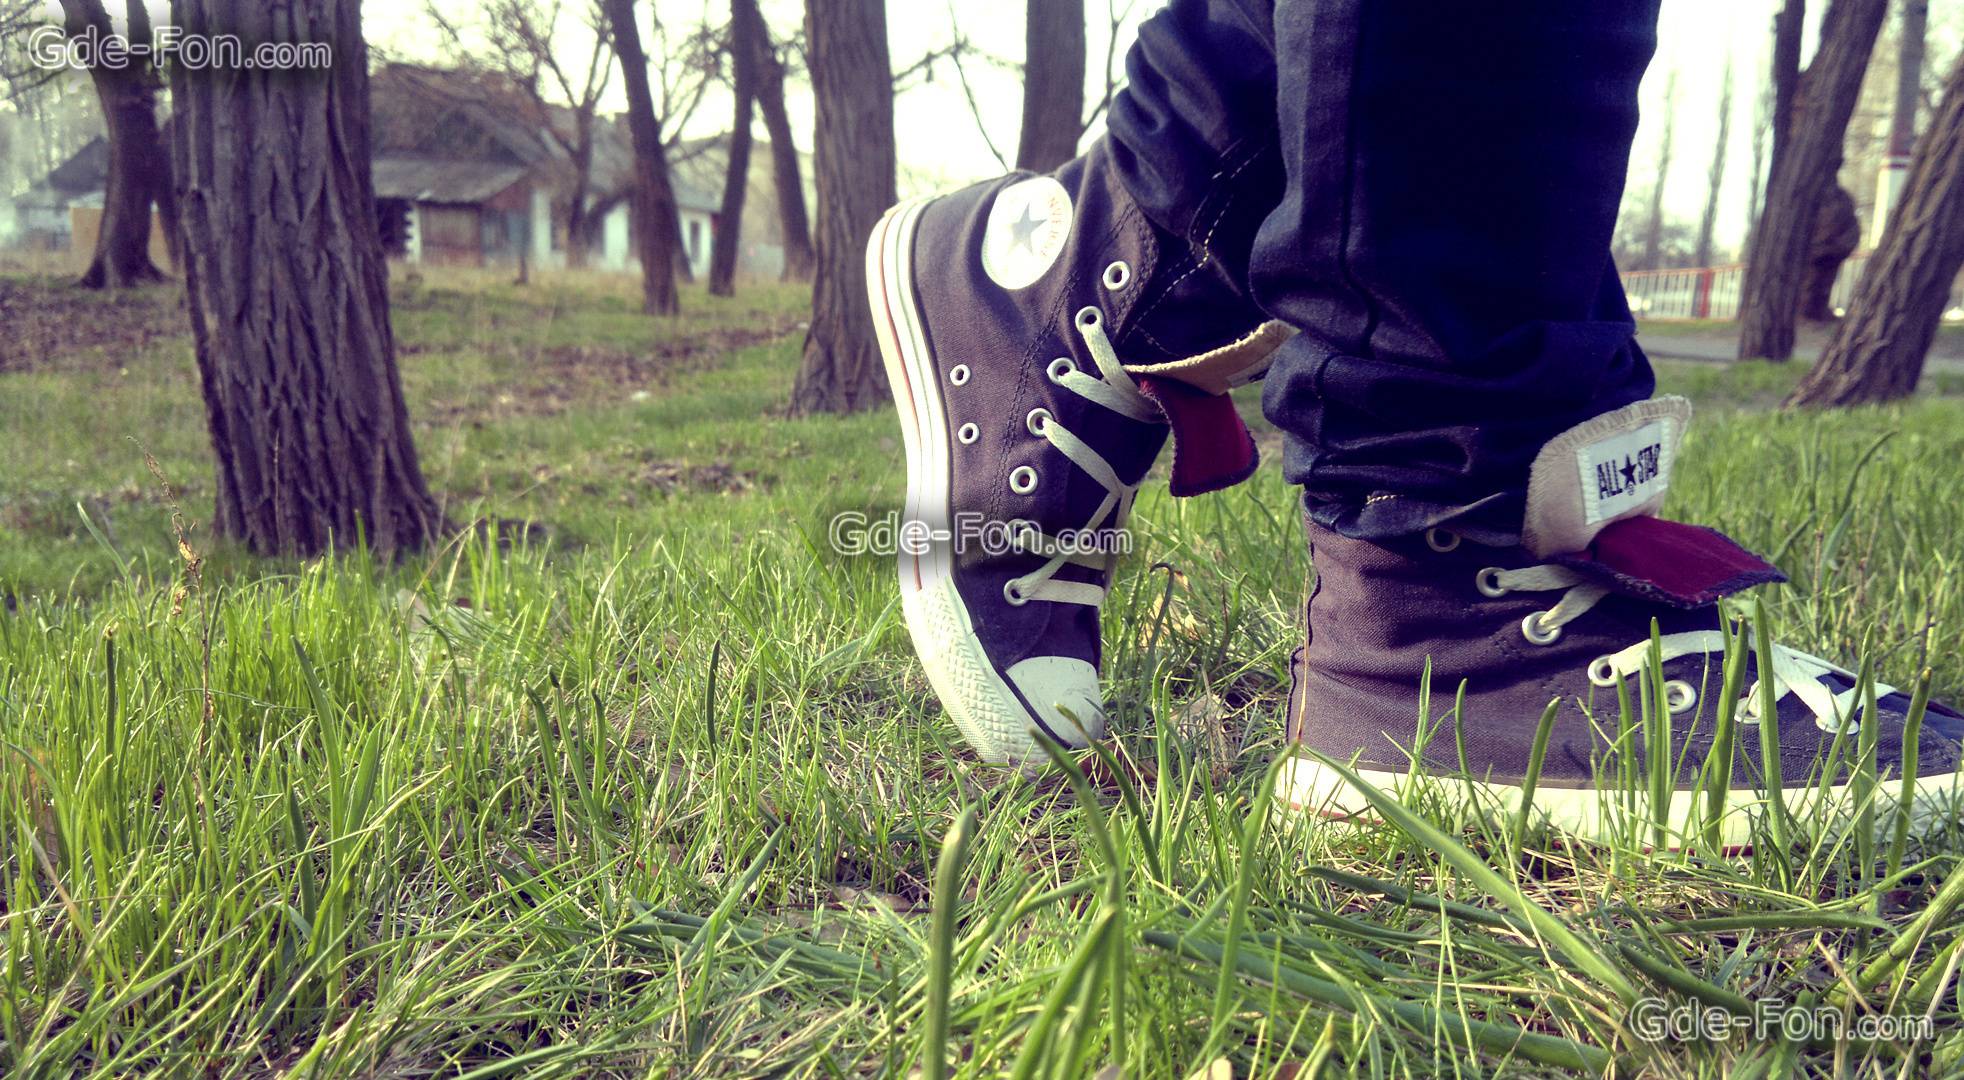 Download wallpapers All Star, converse, sneakers, grass free